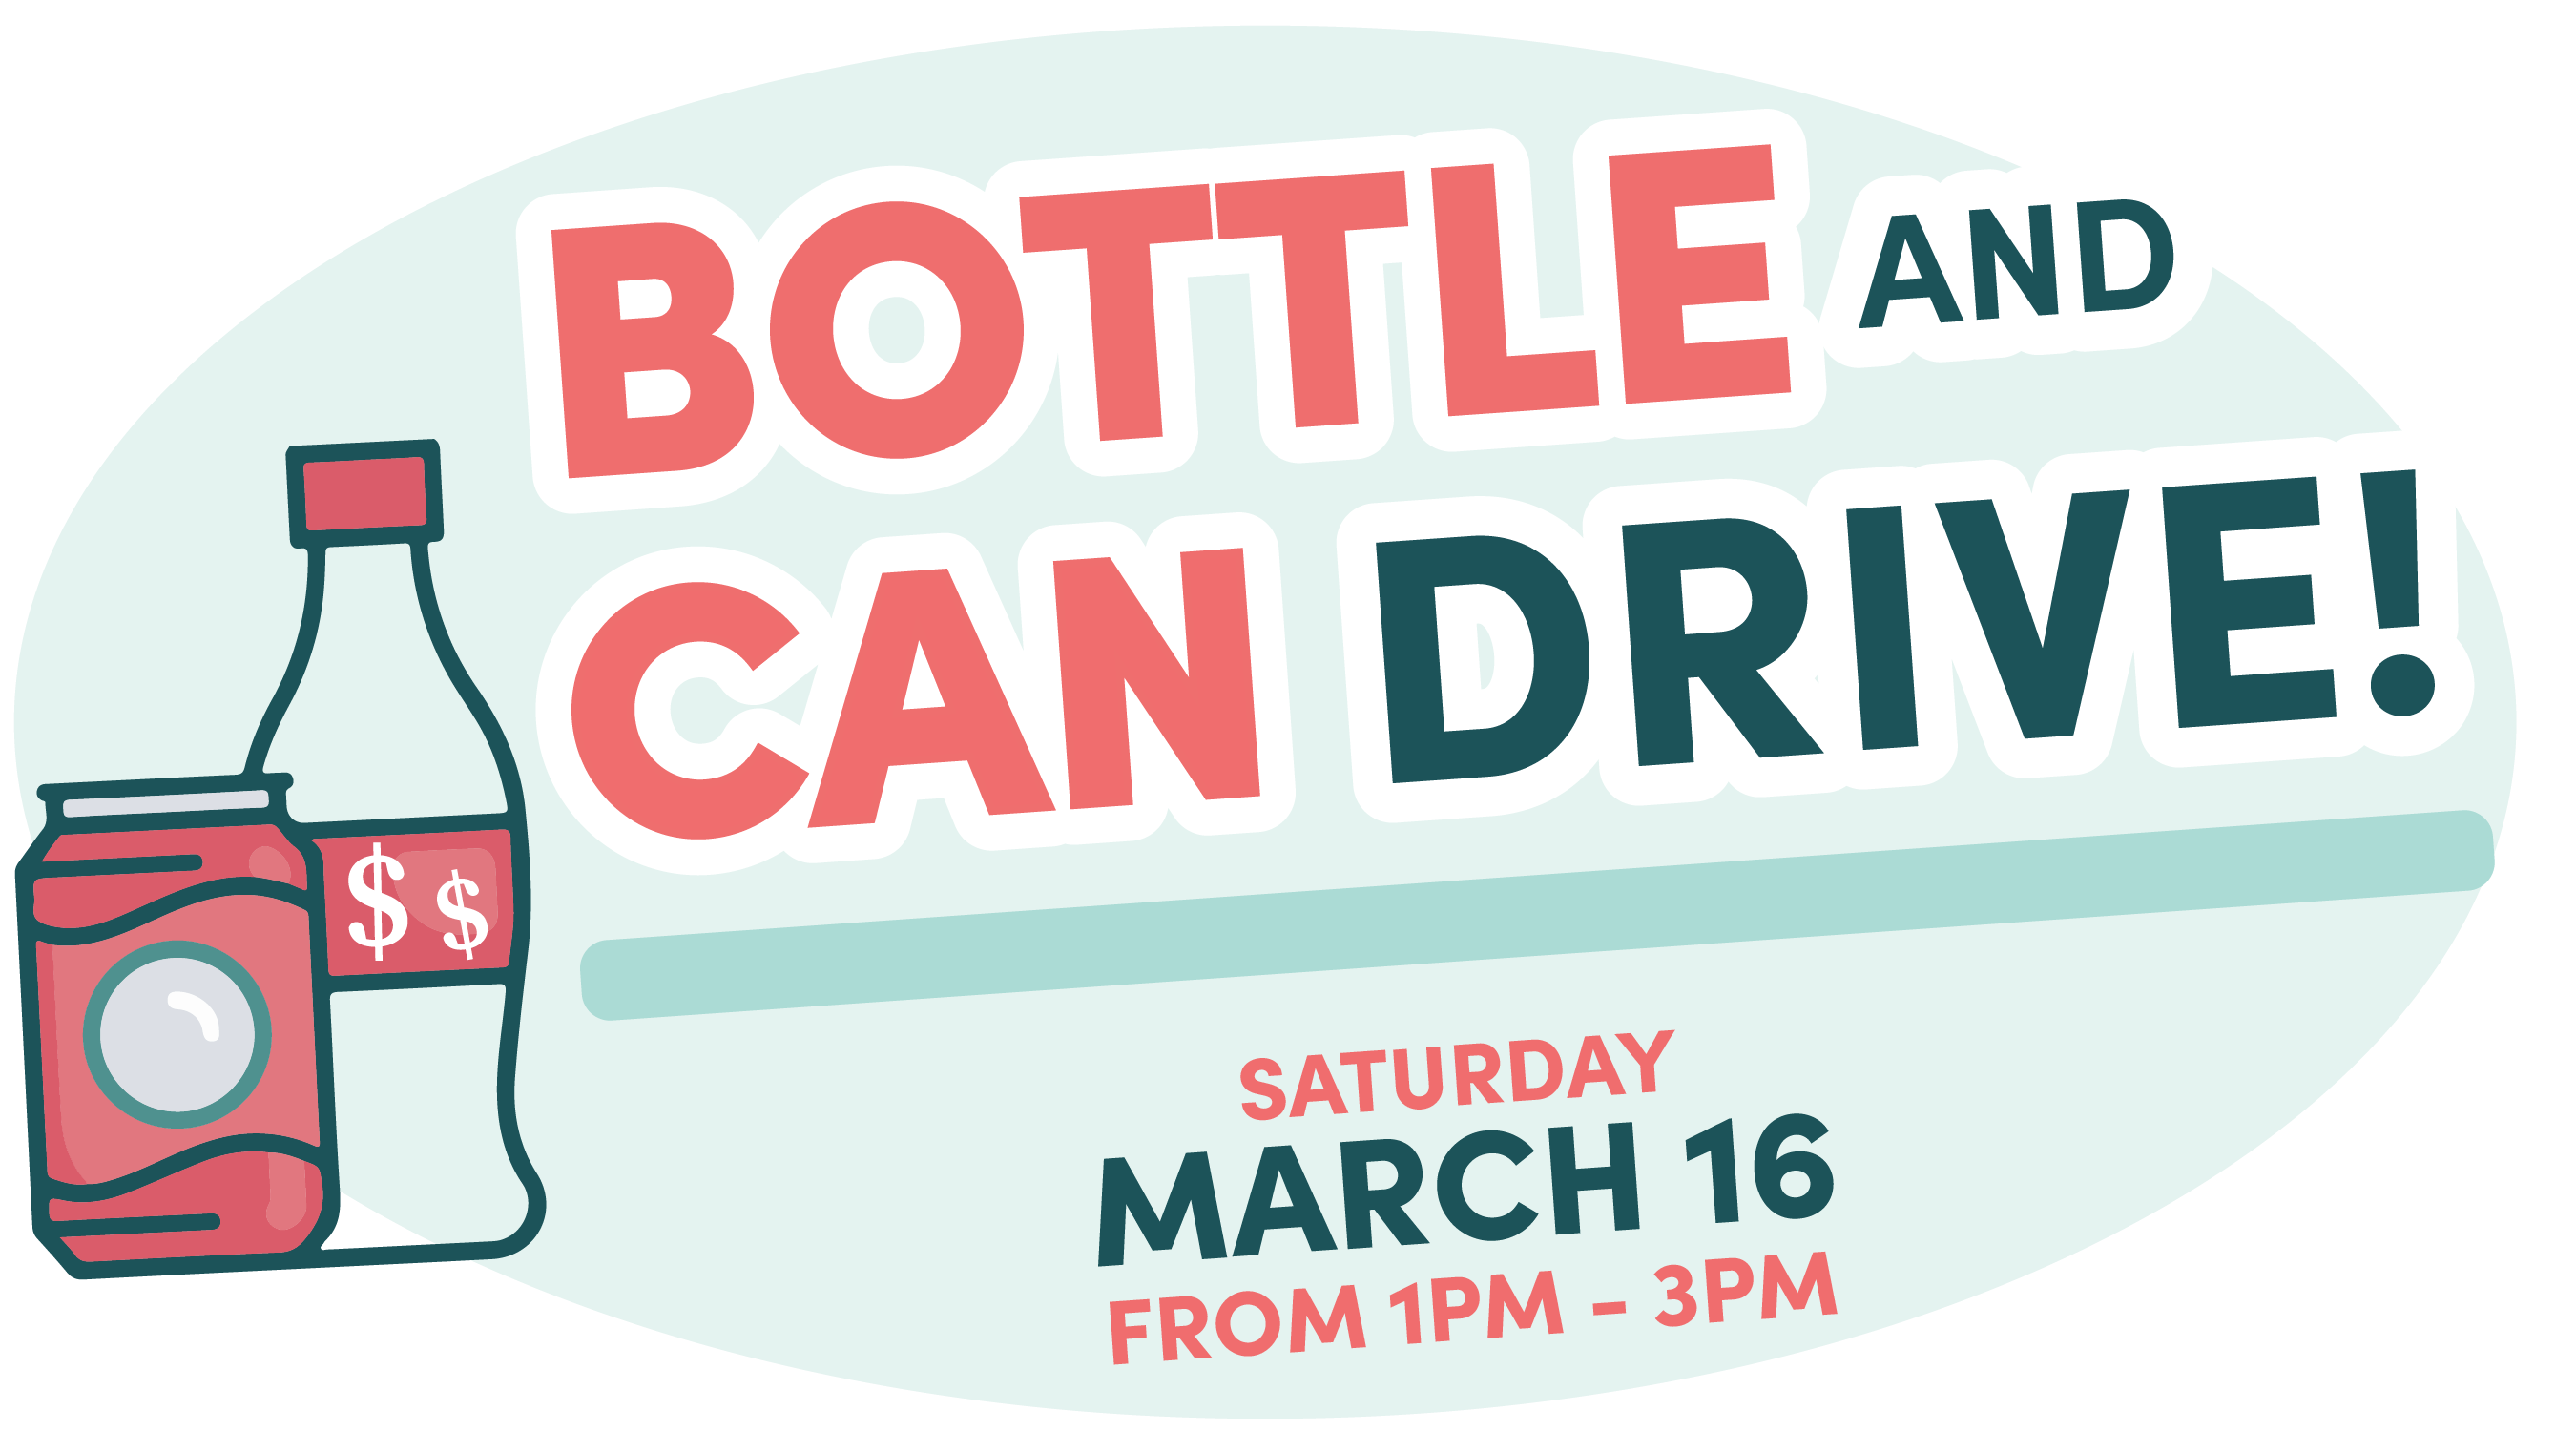 Bottle and Can Drive - March 16 from 1PM-3PM